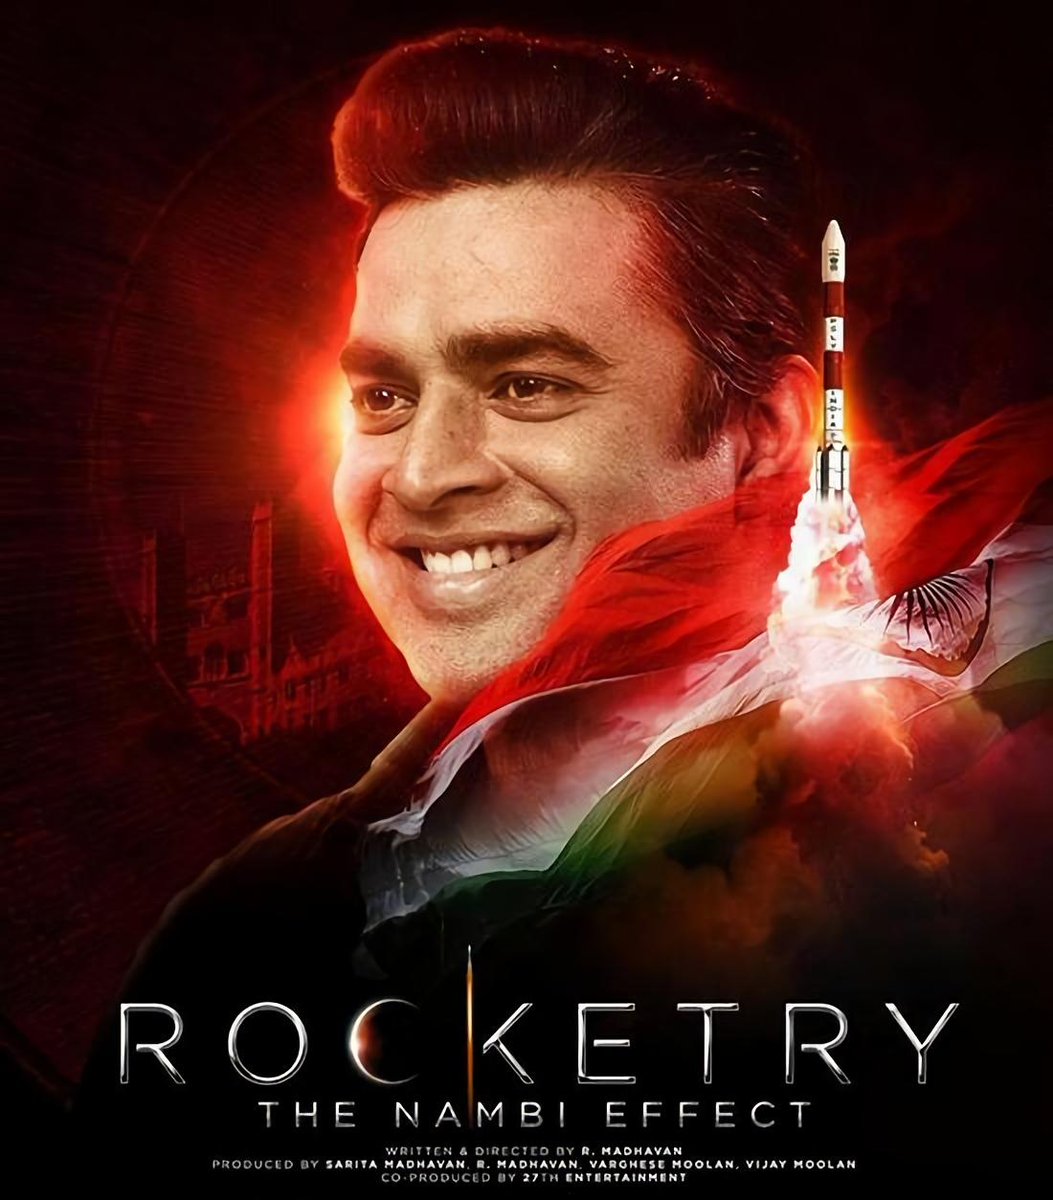 Congratulations @ActorMadhavan Madhavan Sir On Winning Best Feature Film Hindi
Rocketry(The Nambi Effect)

One Of My Favourite Film...👏👏

#RocketryTheNambiEffect